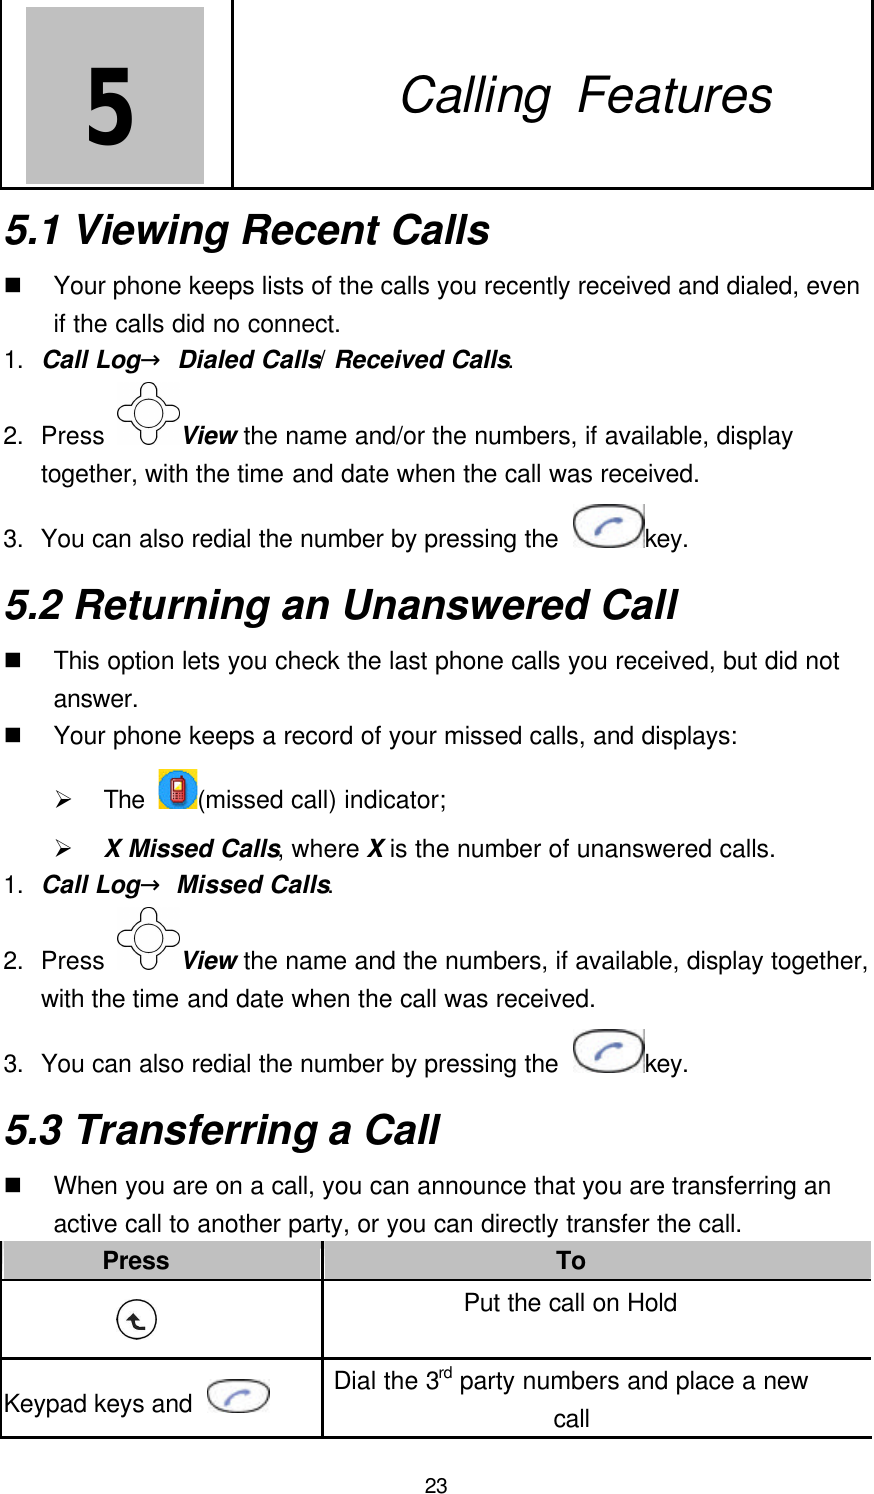  23 5   5. Calling Features 5.1 Viewing Recent Calls n Your phone keeps lists of the calls you recently received and dialed, even if the calls did no connect. 1. Call Log→ Dialed Calls/ Received Calls. 2. Press  View the name and/or the numbers, if available, display together, with the time and date when the call was received. 3. You can also redial the number by pressing the  key. 5.2 Returning an Unanswered Call n This option lets you check the last phone calls you received, but did not answer. n Your phone keeps a record of your missed calls, and displays: Ø The  (missed call) indicator; Ø X Missed Calls, where X is the number of unanswered calls. 1. Call Log→ Missed Calls. 2. Press  View the name and the numbers, if available, display together, with the time and date when the call was received. 3. You can also redial the number by pressing the  key. 5.3 Transferring a Call n When you are on a call, you can announce that you are transferring an active call to another party, or you can directly transfer the call. Press To  Put the call on Hold   Keypad keys and   Dial the 3rd party numbers and place a new call 